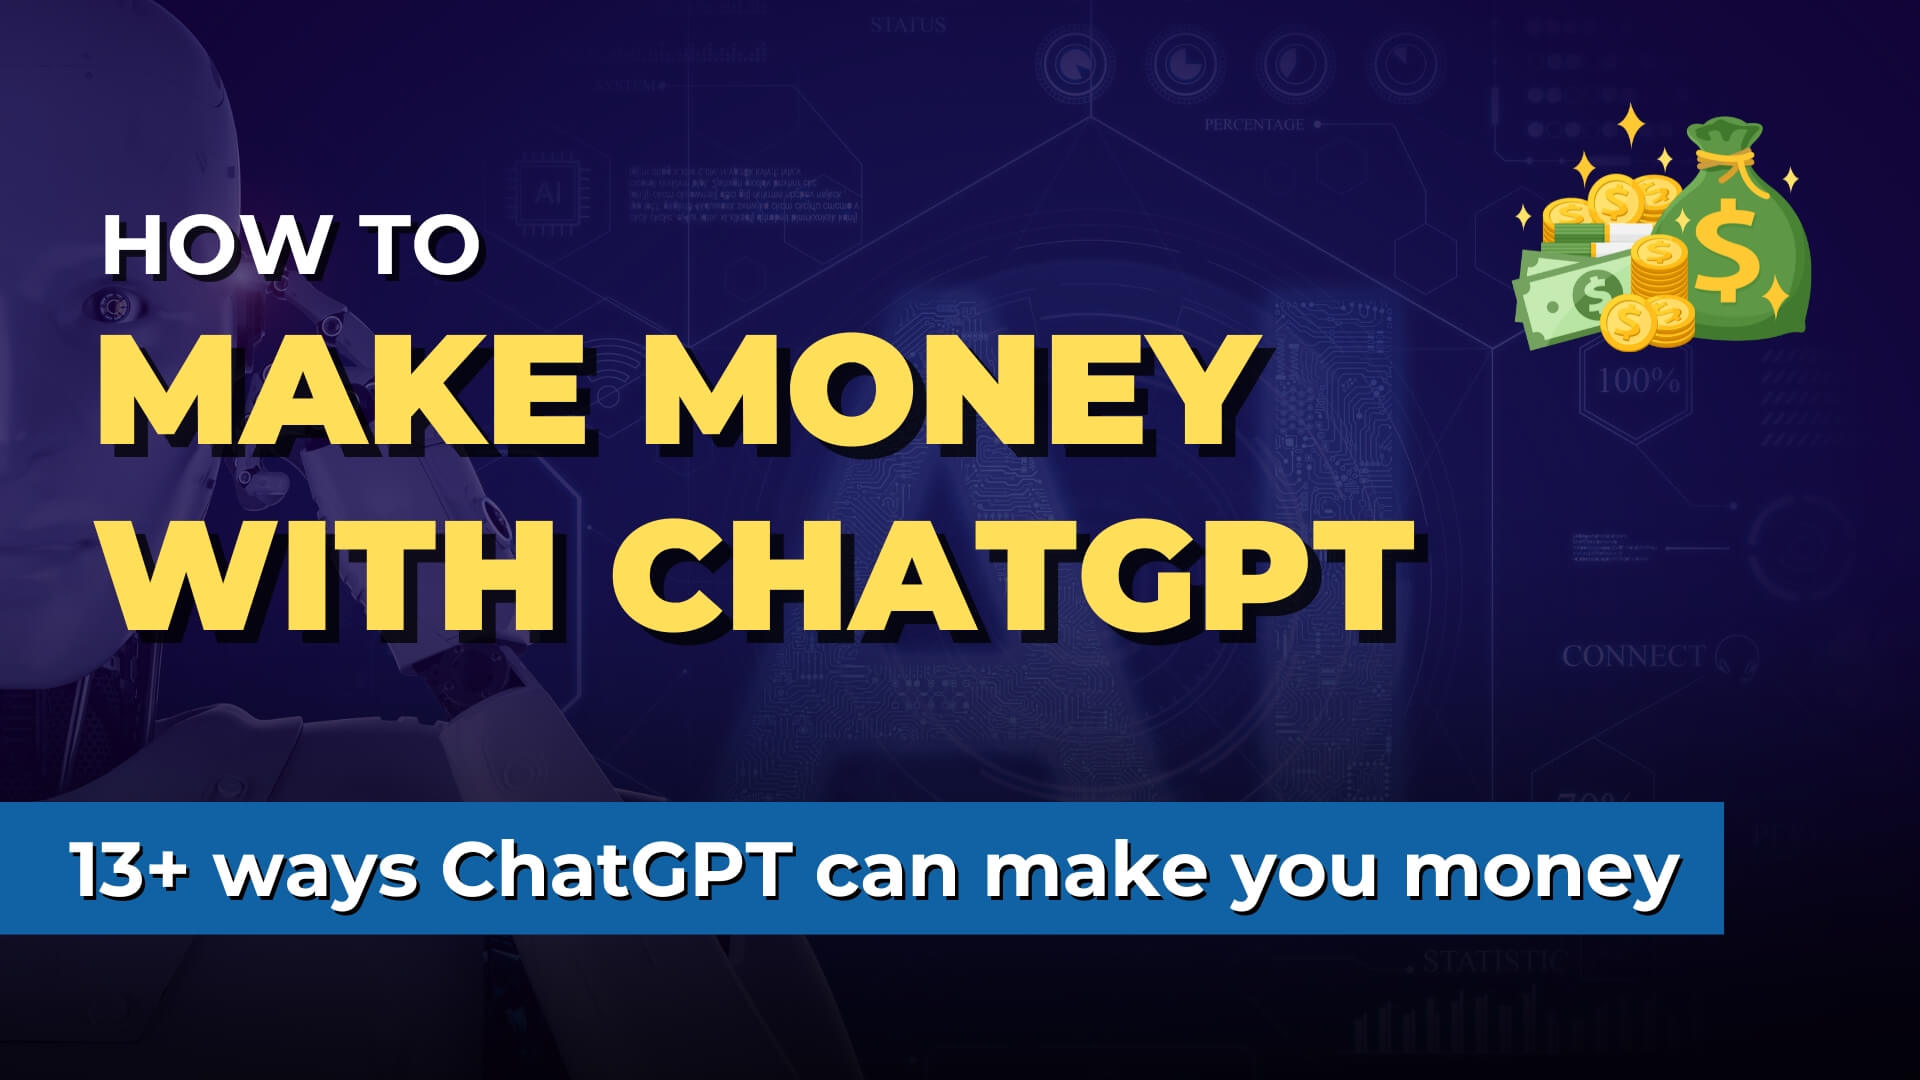 How to make money with ChatGPT